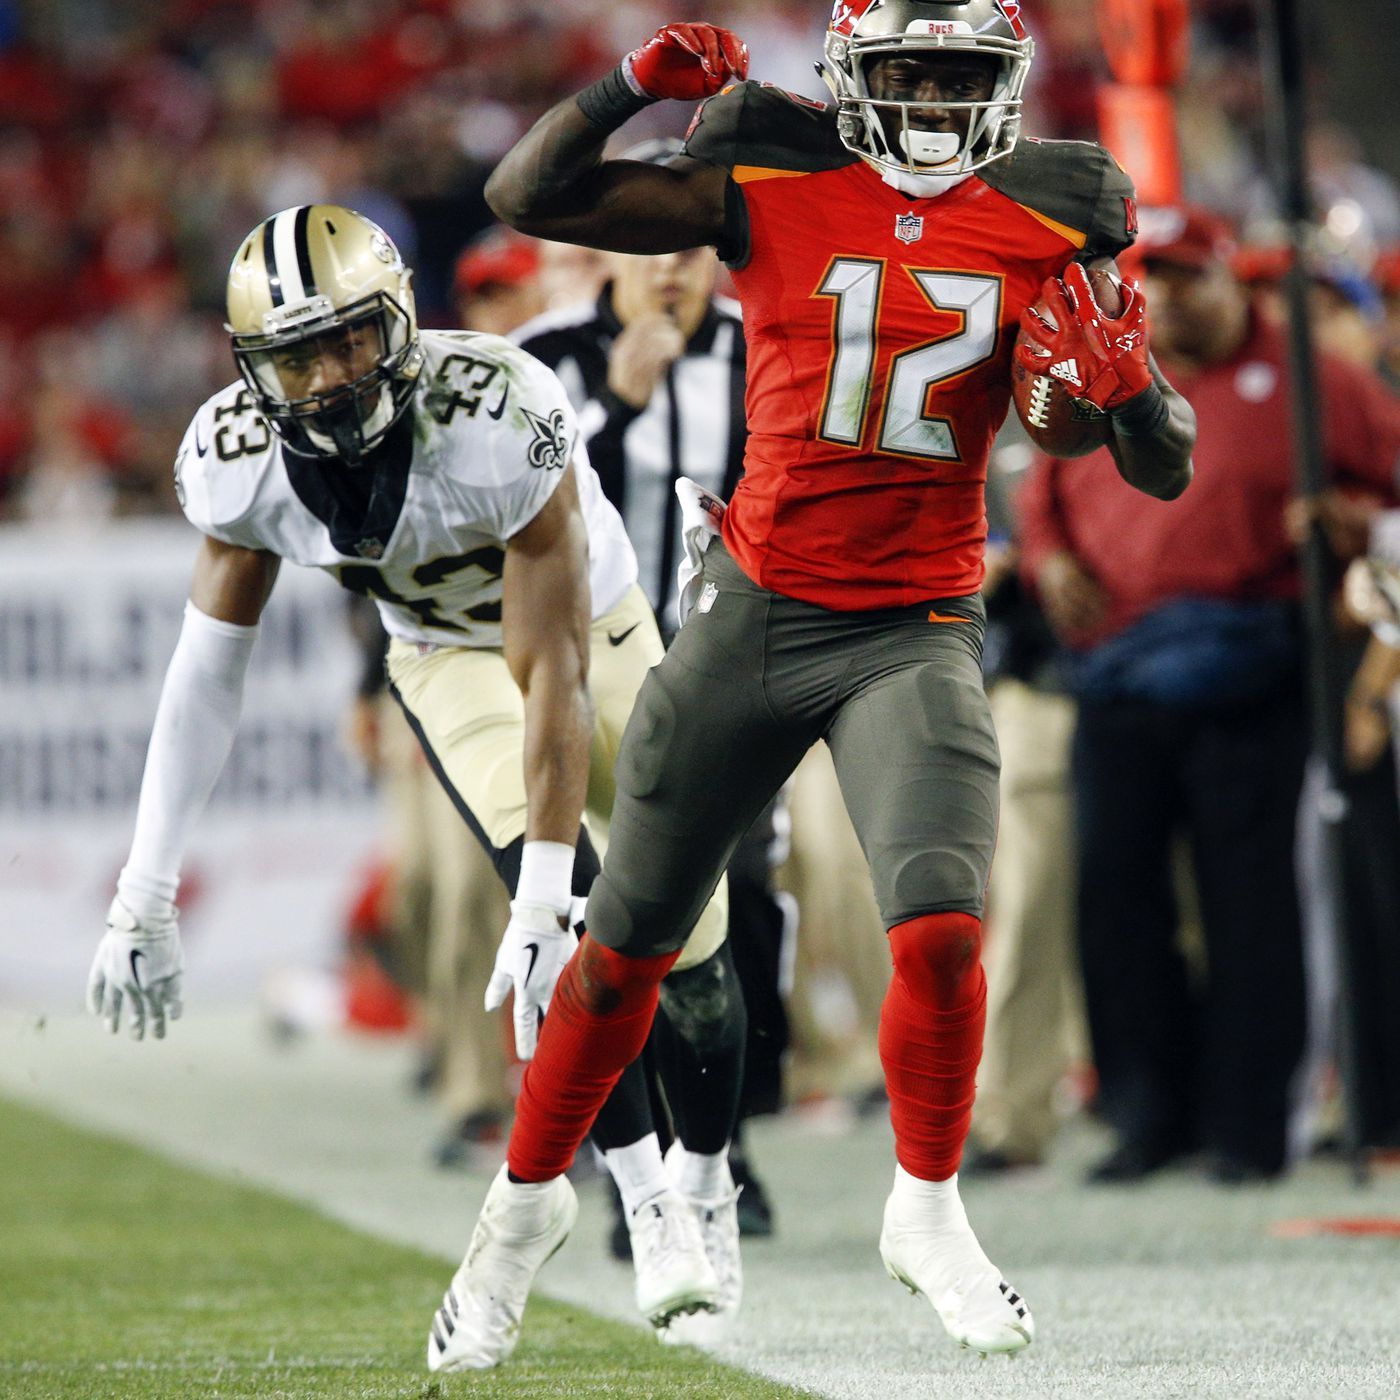 Chris Godwin is your NFC Offensive Player of the Week